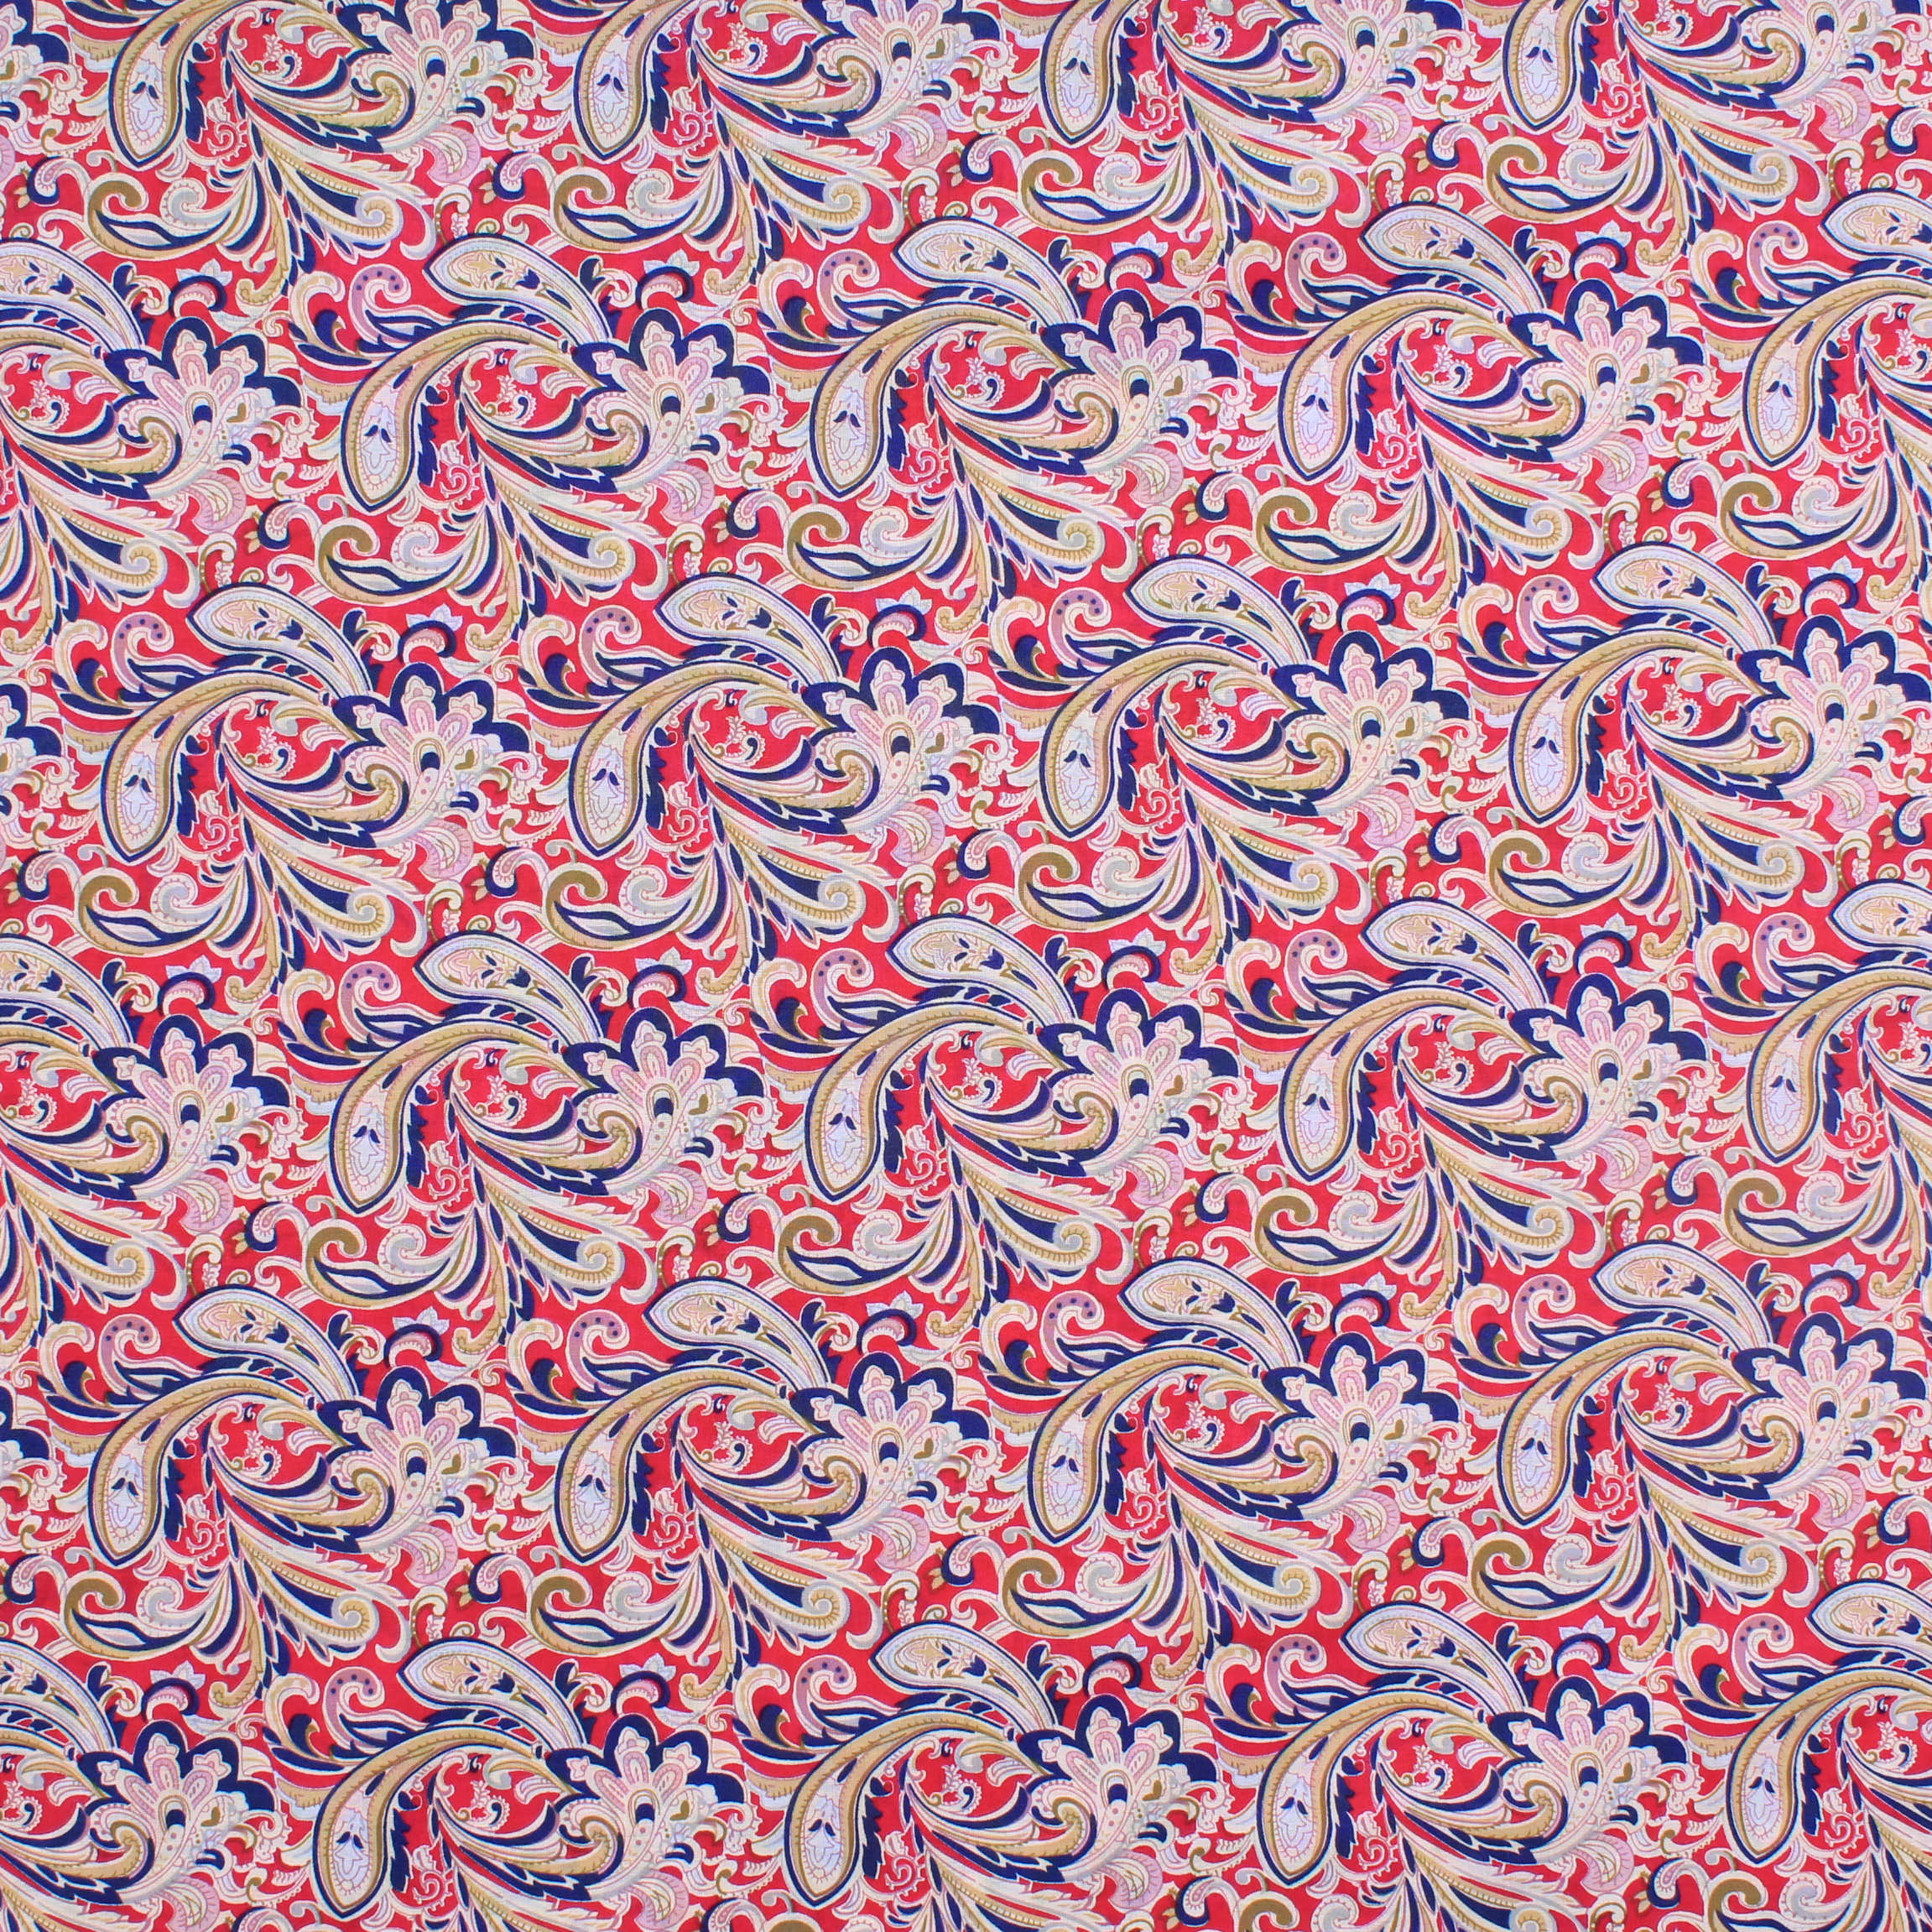 100% Cotton Lawn, 'Red Pop Paisley', Approx. 58" Wide